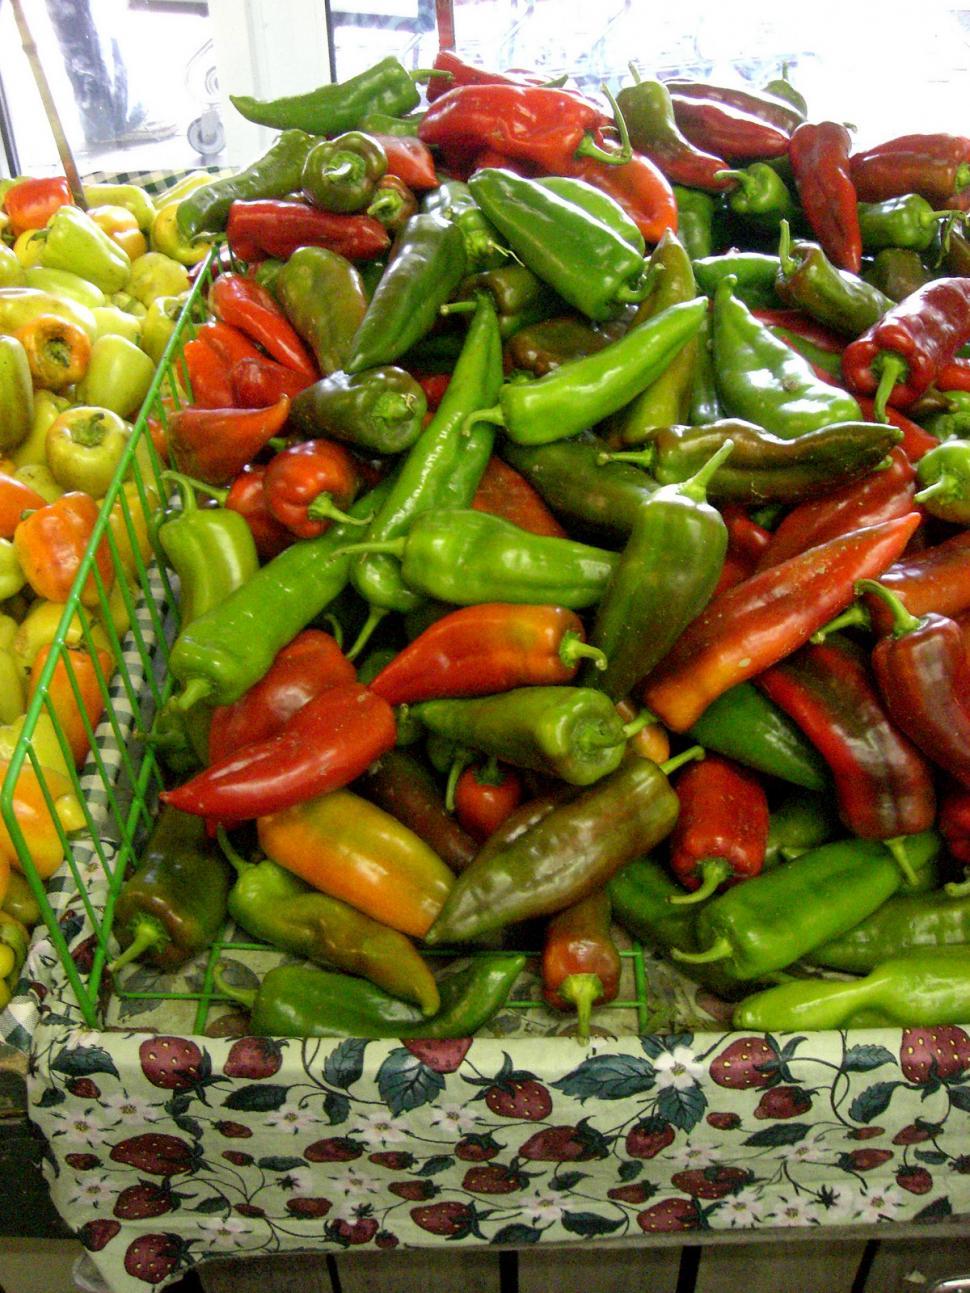 Free Image of A Pile of Peppers on a Table 